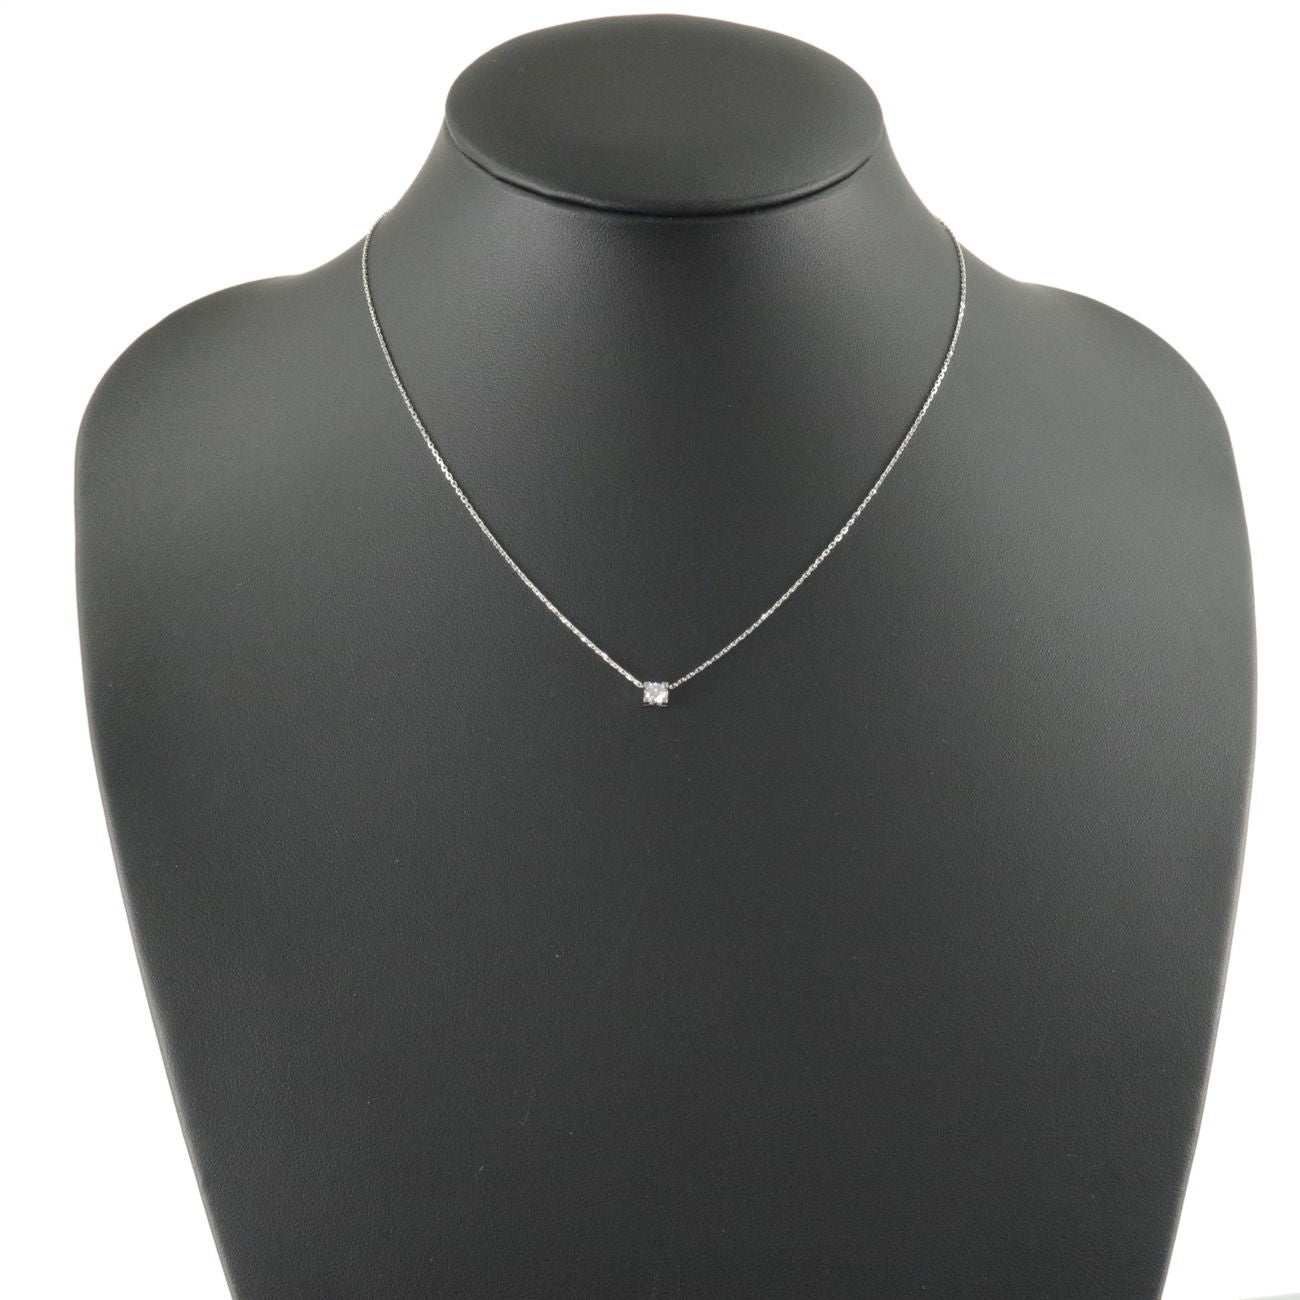 How to Make Your Everyday Look More Stylish-With Our Different Types of Diamond  Pendants, Of course! - The Caratlane